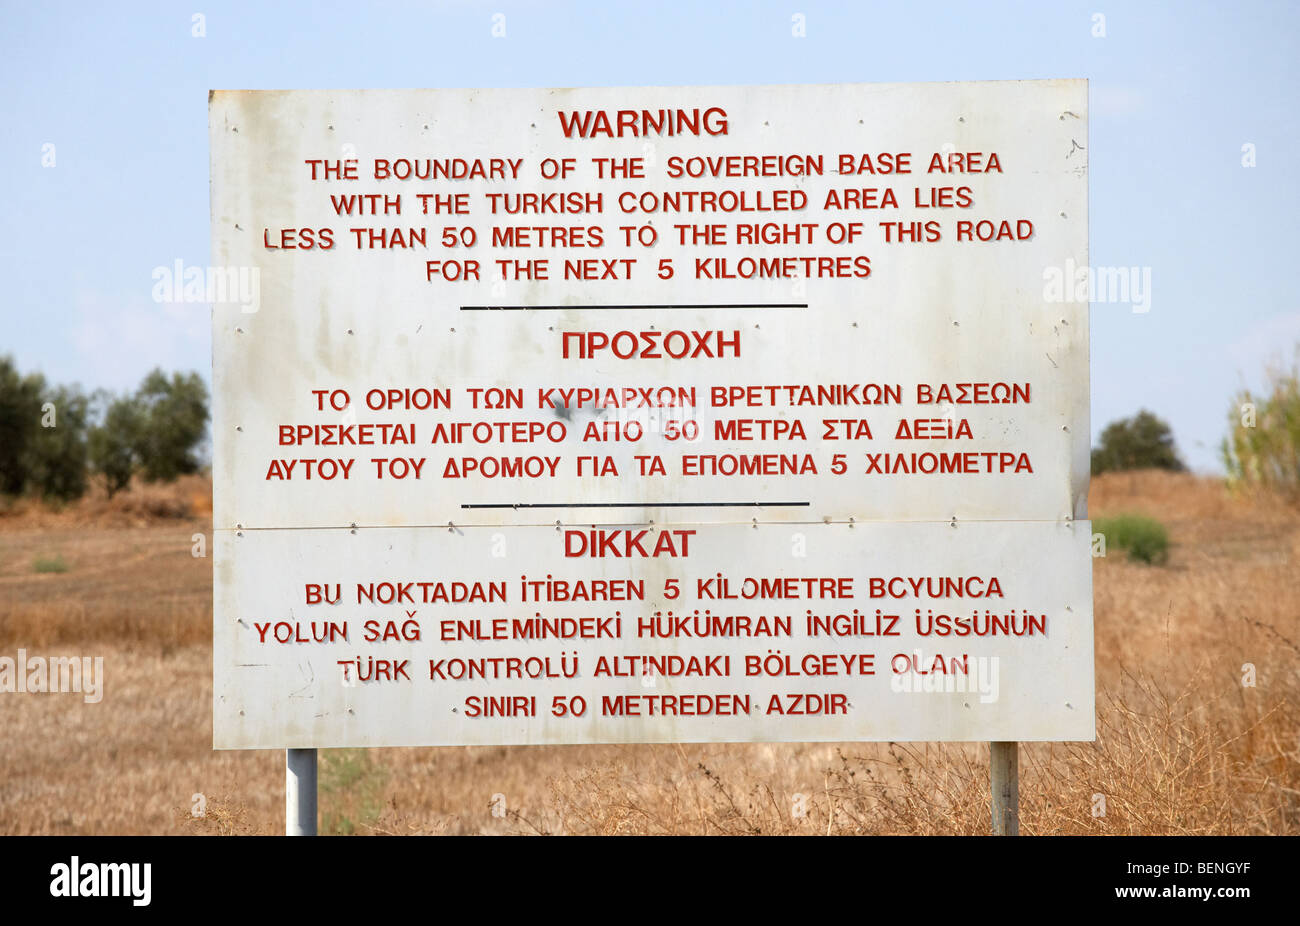 warning sign warning of the border of the turkish military controlled area of the SBA eastern Sovereign Base area of Dhekelia in cyprus Stock Photo